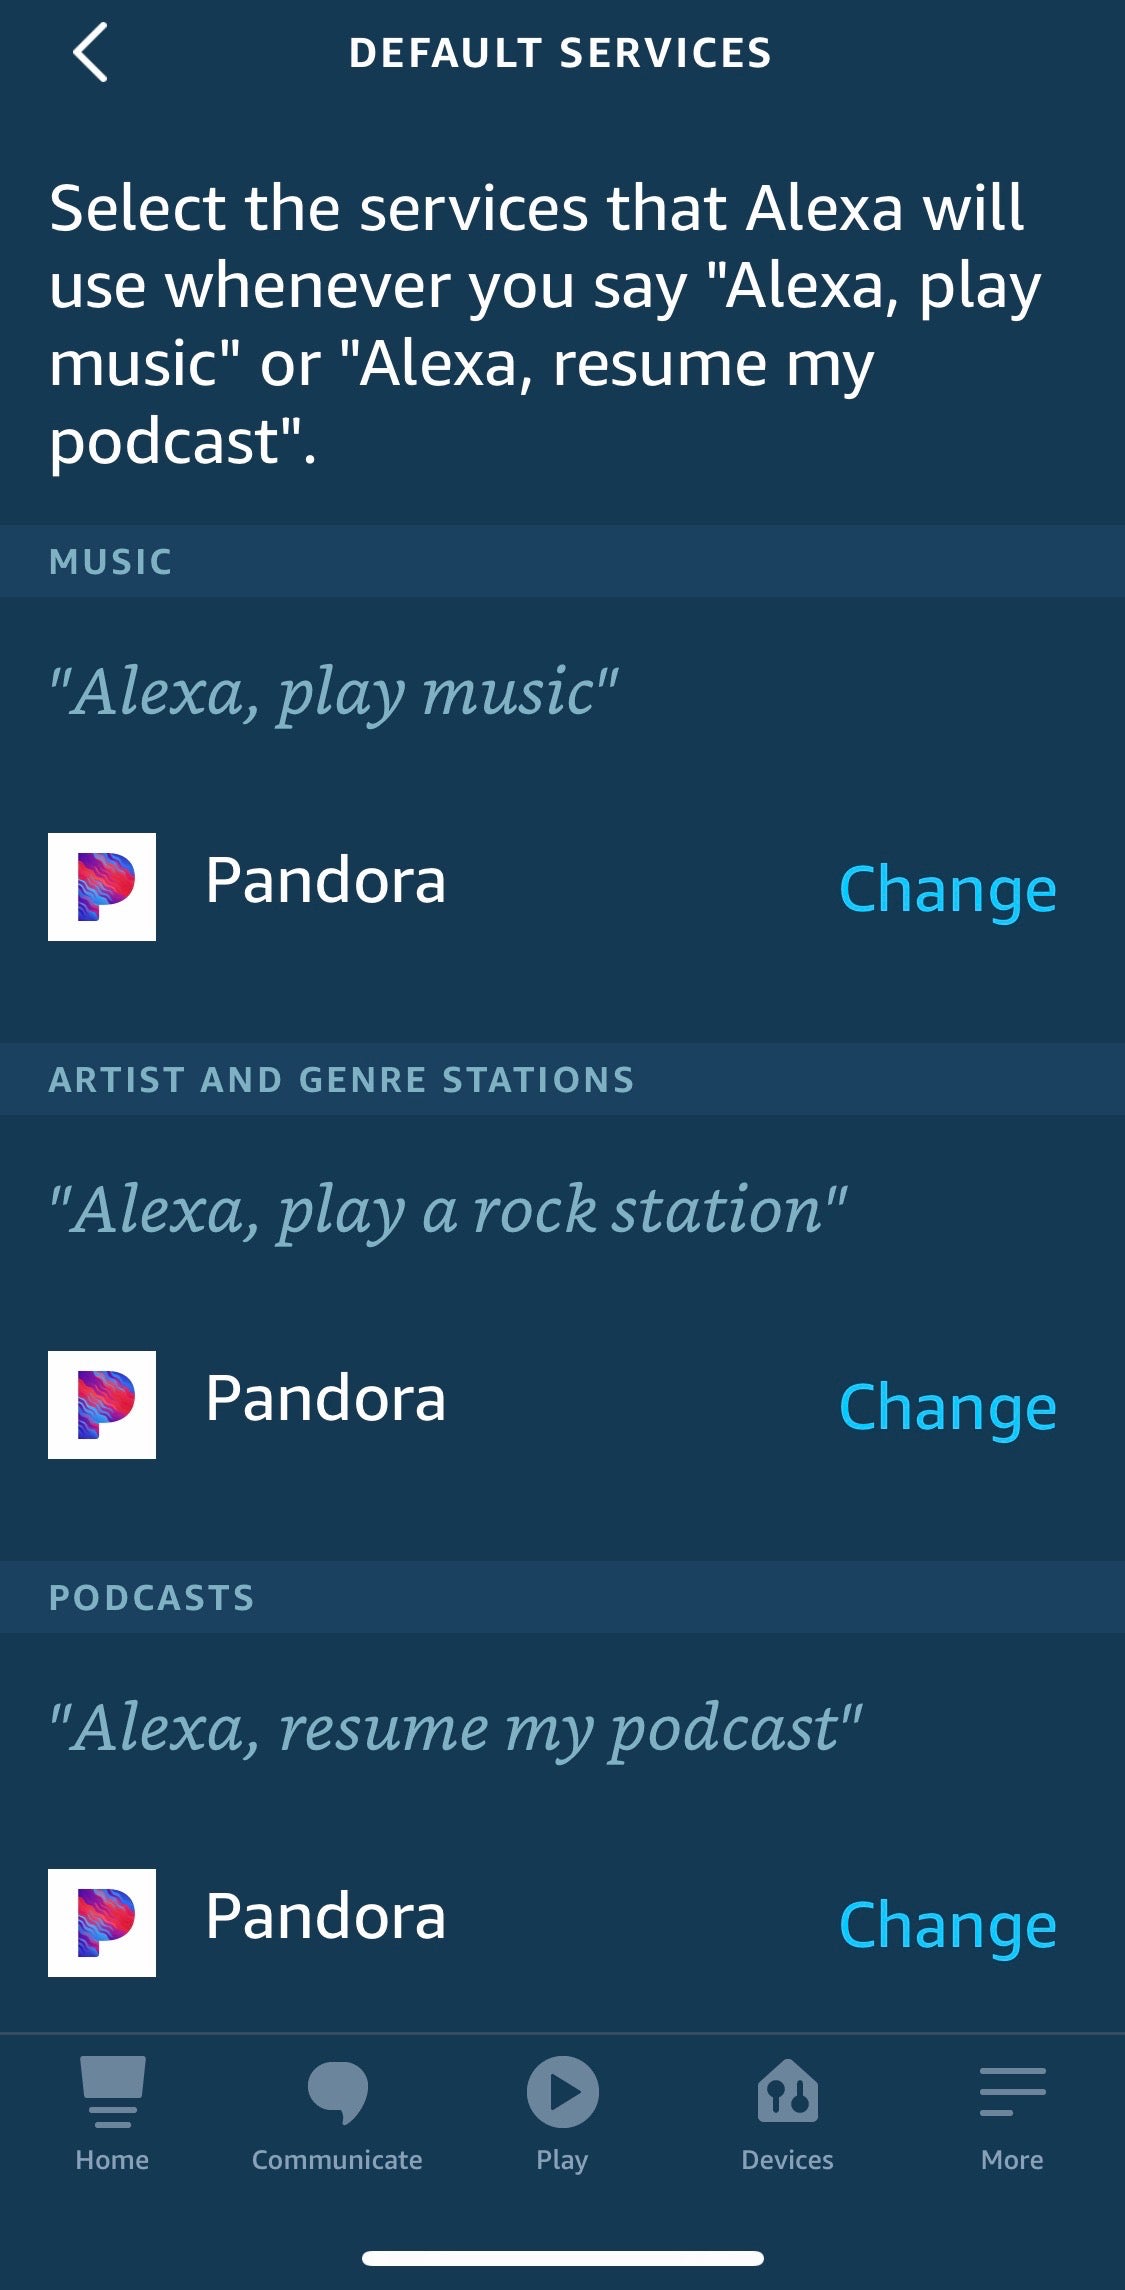 Pandora podcasts launched on all Alexa-enabled devices